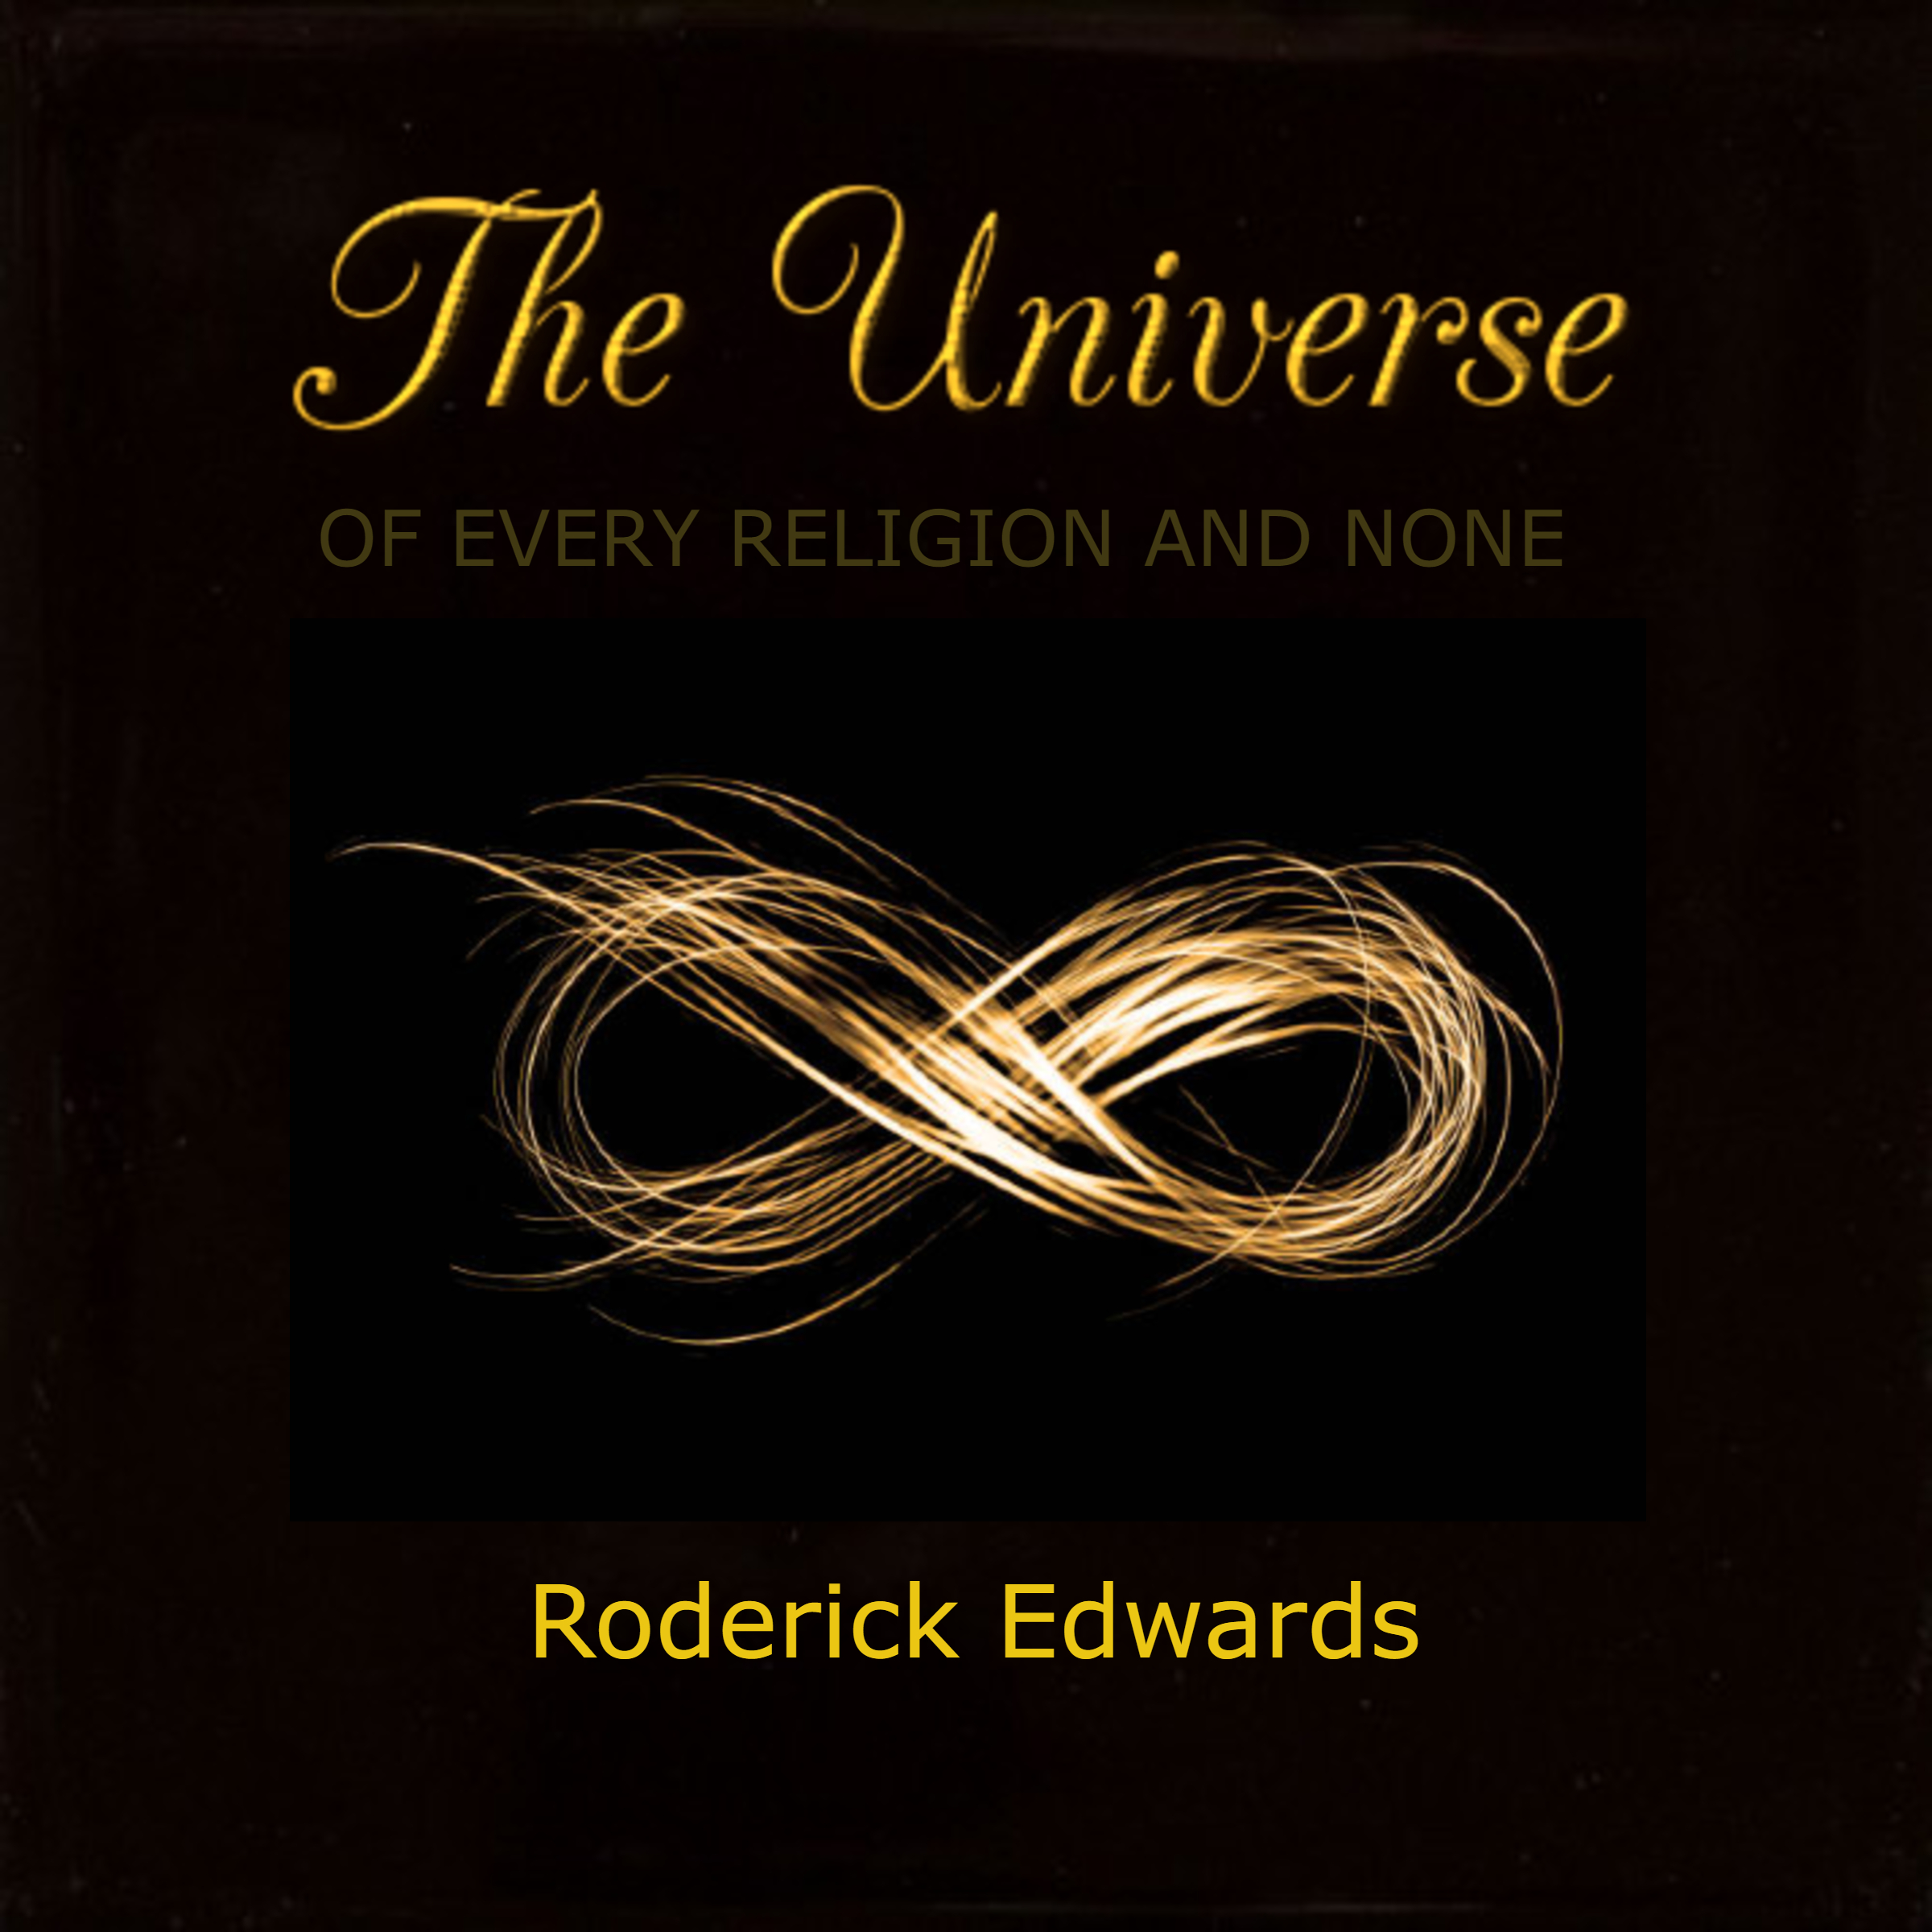 FREE: The Universe: Of Every Religion and None by Roderick Edwards